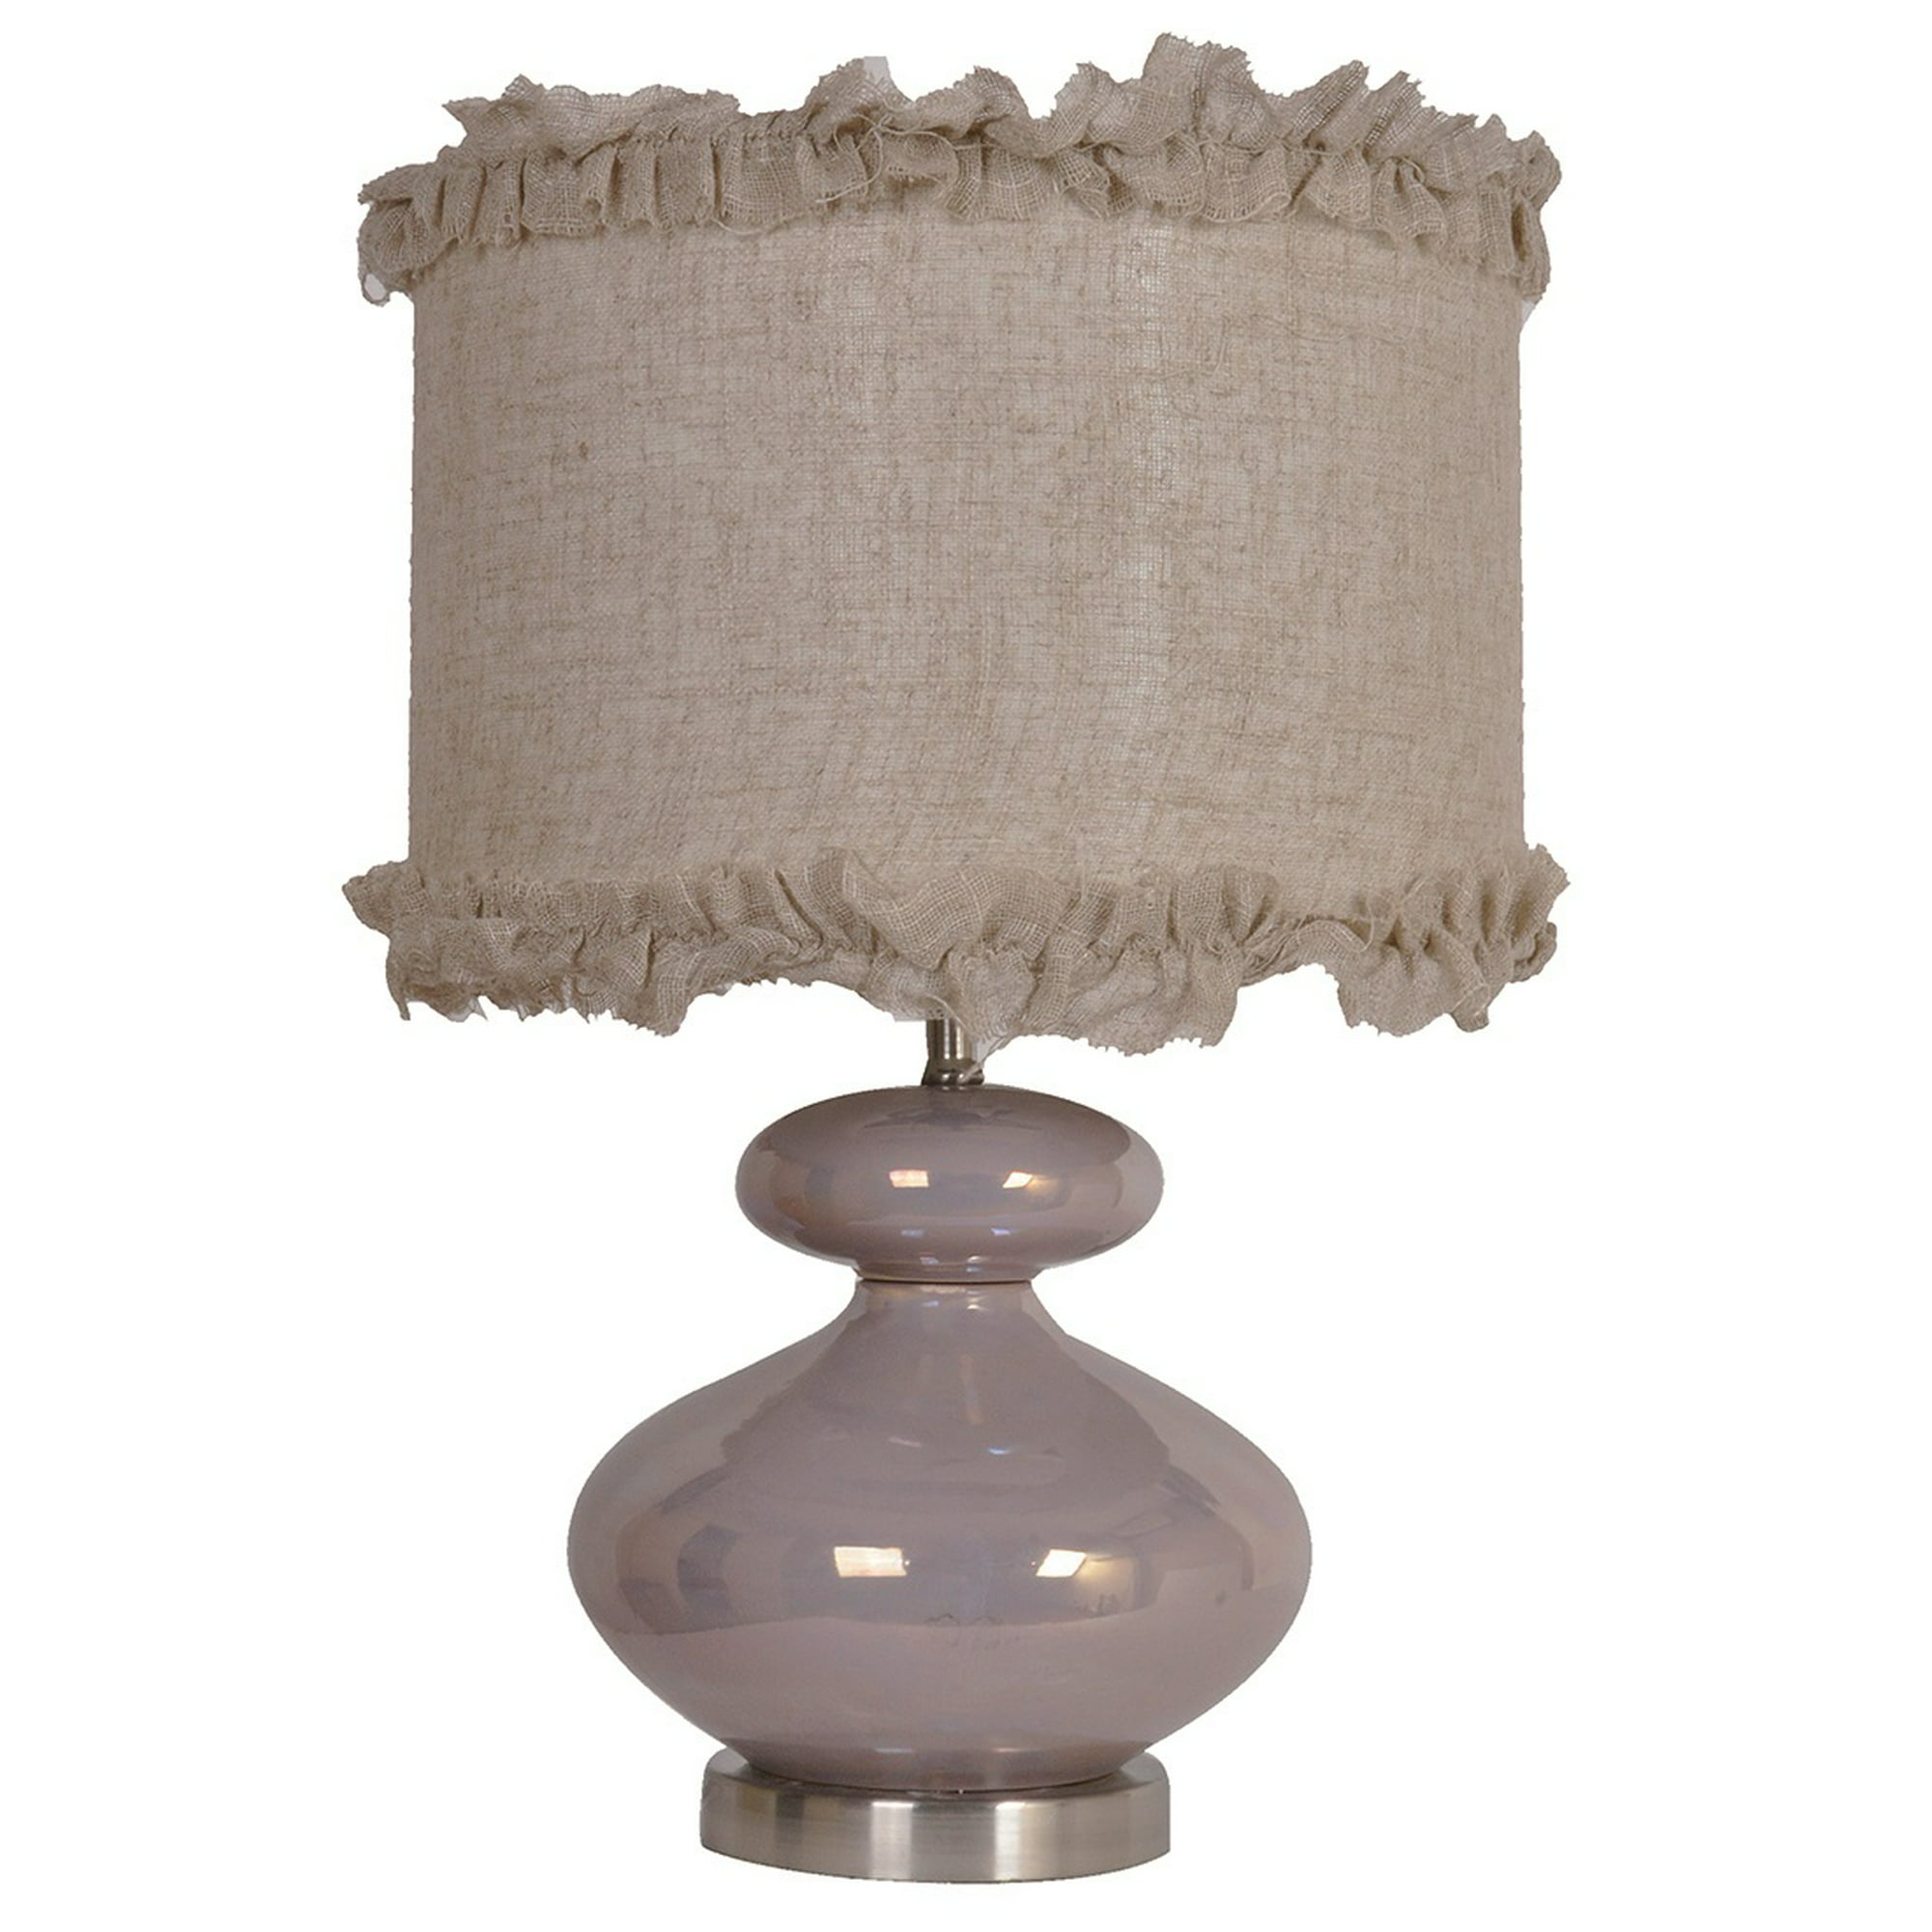 Courtney Leigh Table Lamp 21 5 Inches, Courtney Table Lamp